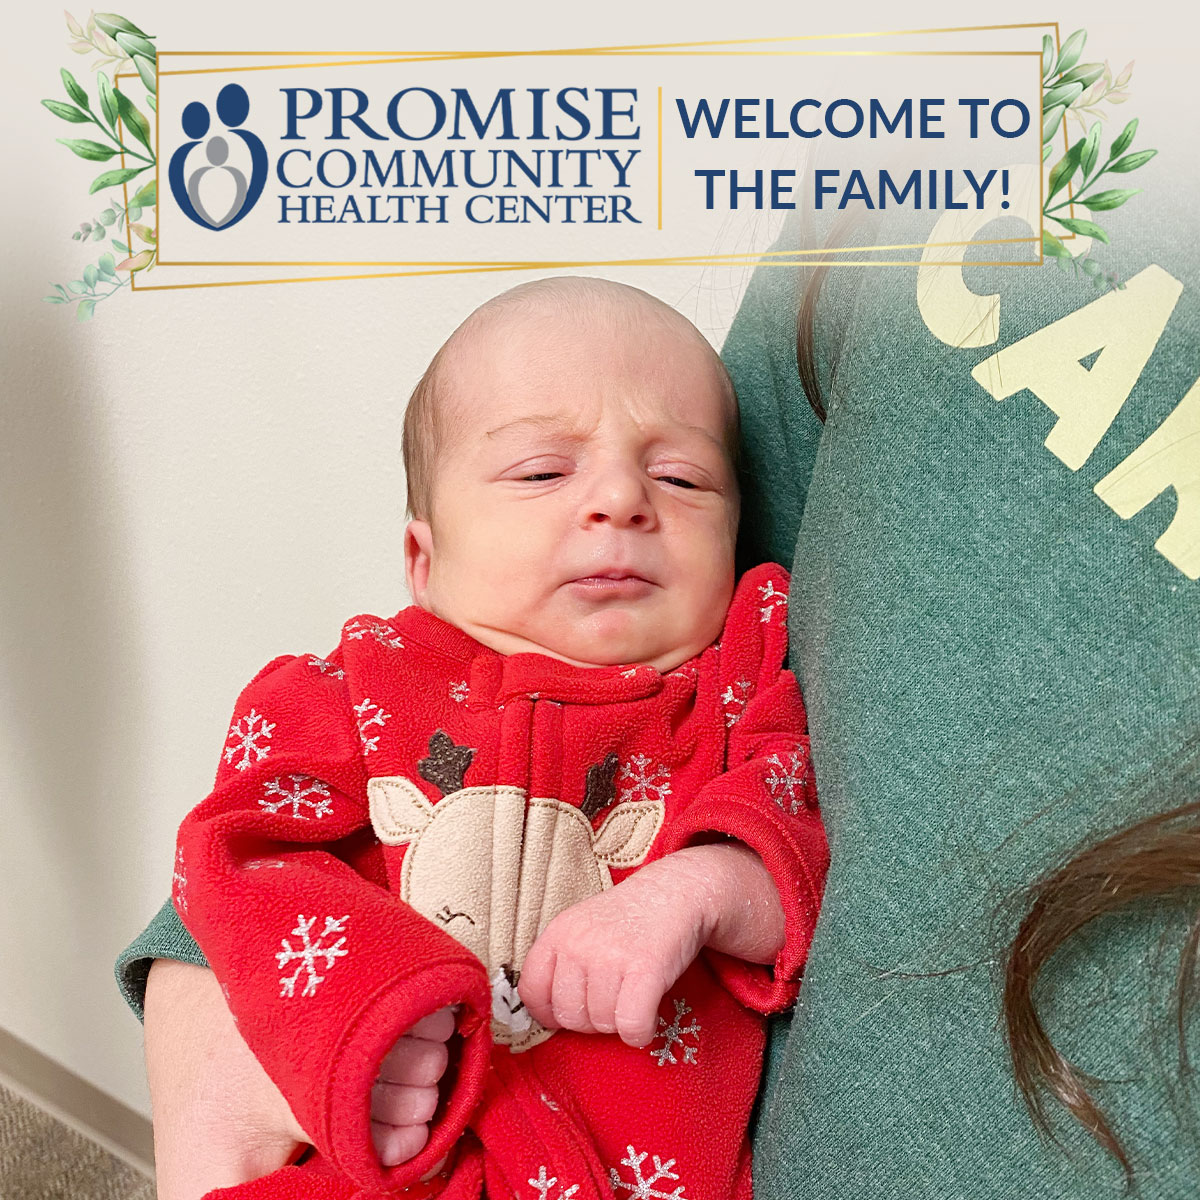 Widman family from Merrill, Iowa home birth | Promise Community Health Center in Sioux Center, Iowa | Home births in northwest Iowa, Home births in southeast South Dakota, Home births in southwest Minnesota | Home births in Sioux Falls South Dakota, Home births in Beresford South Dakota, Home births in Sioux City IA, Home births in LeMars IA, Home births in Worthington MN, Home births in Iowa, Home births in South Dakota, Home births in Minnesota